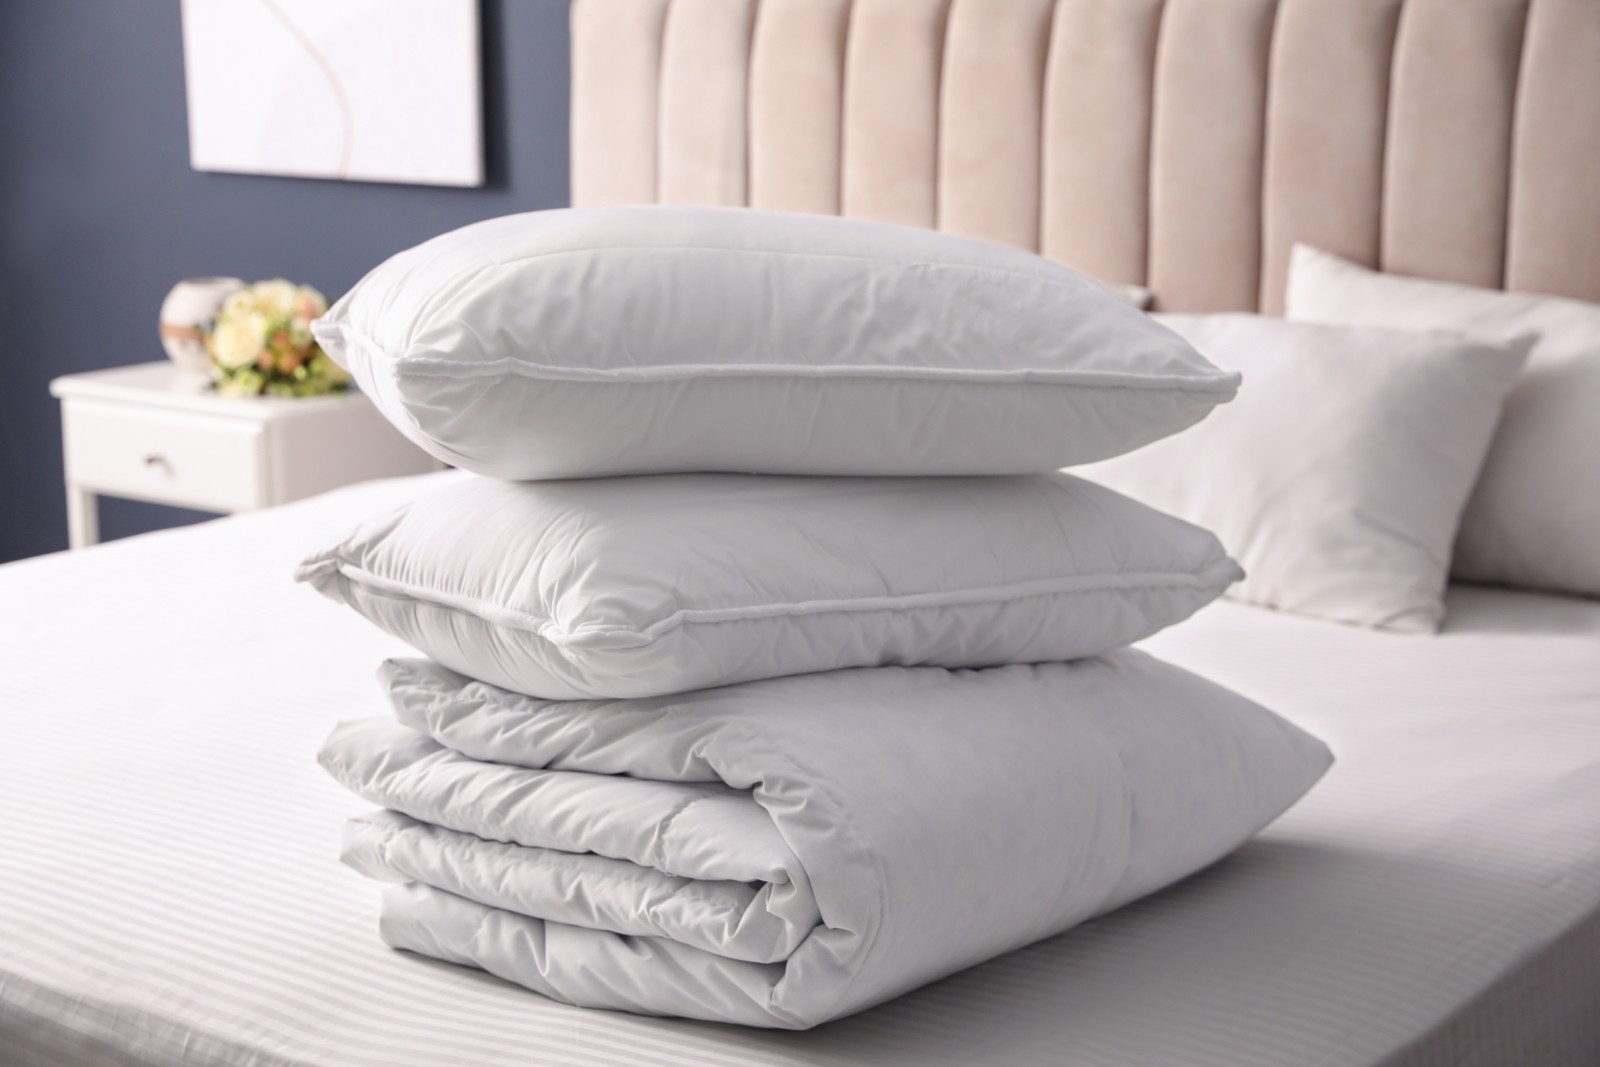 Photo of soft folded blanket and pillows on bed indoors